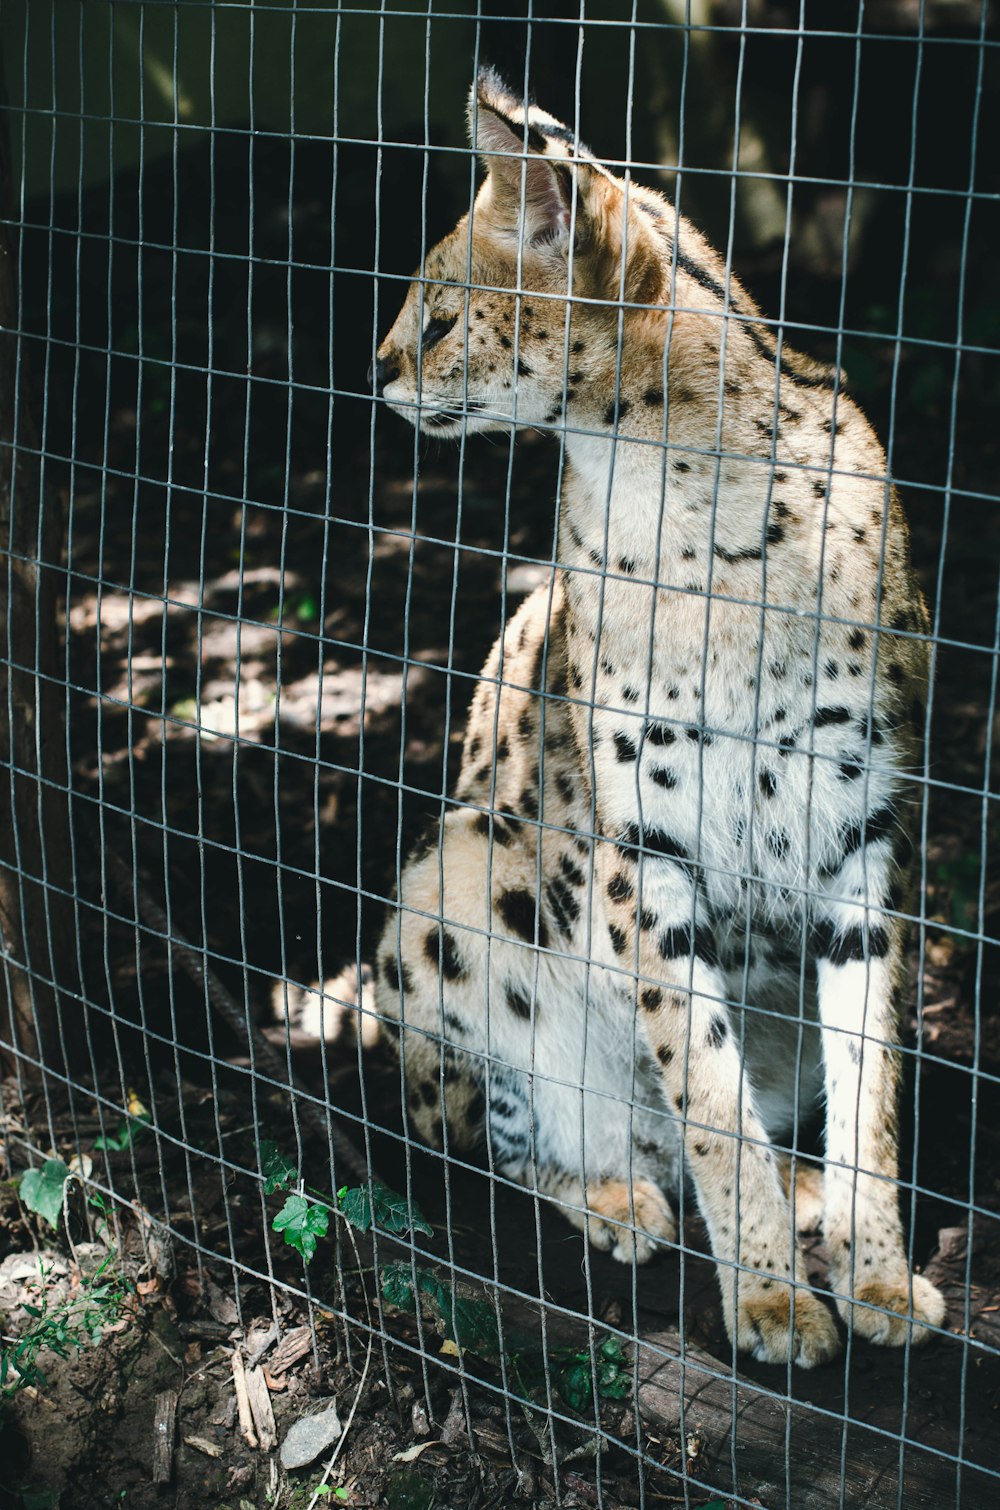 cheetah in cage during daytime